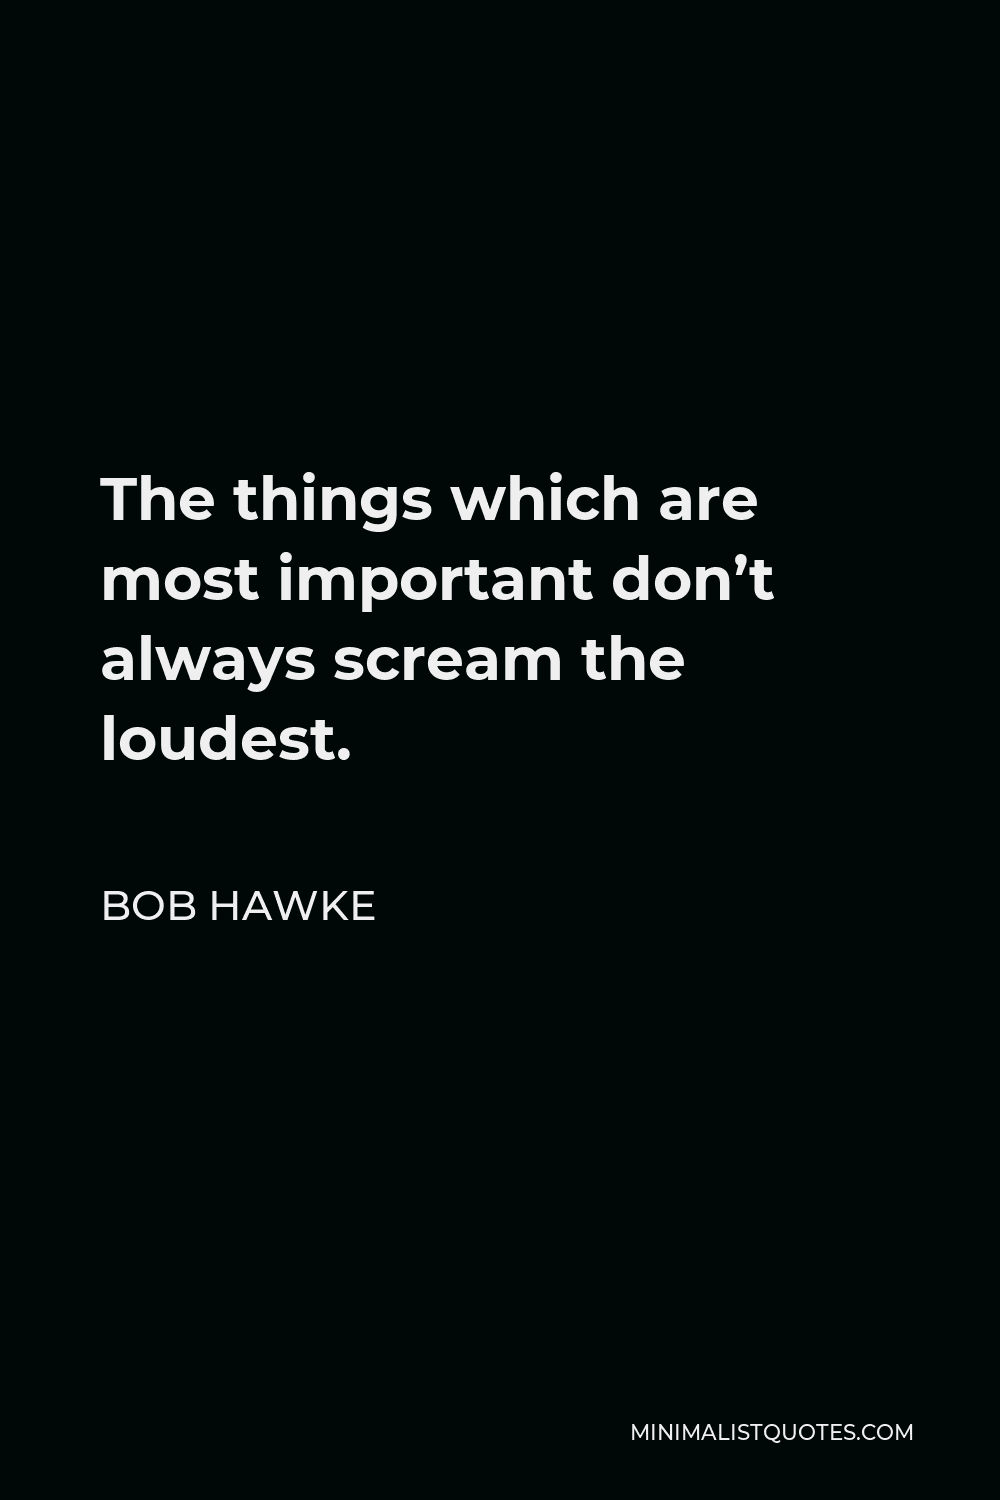 Bob Hawke Quote - The things which are most important don’t always scream the loudest.